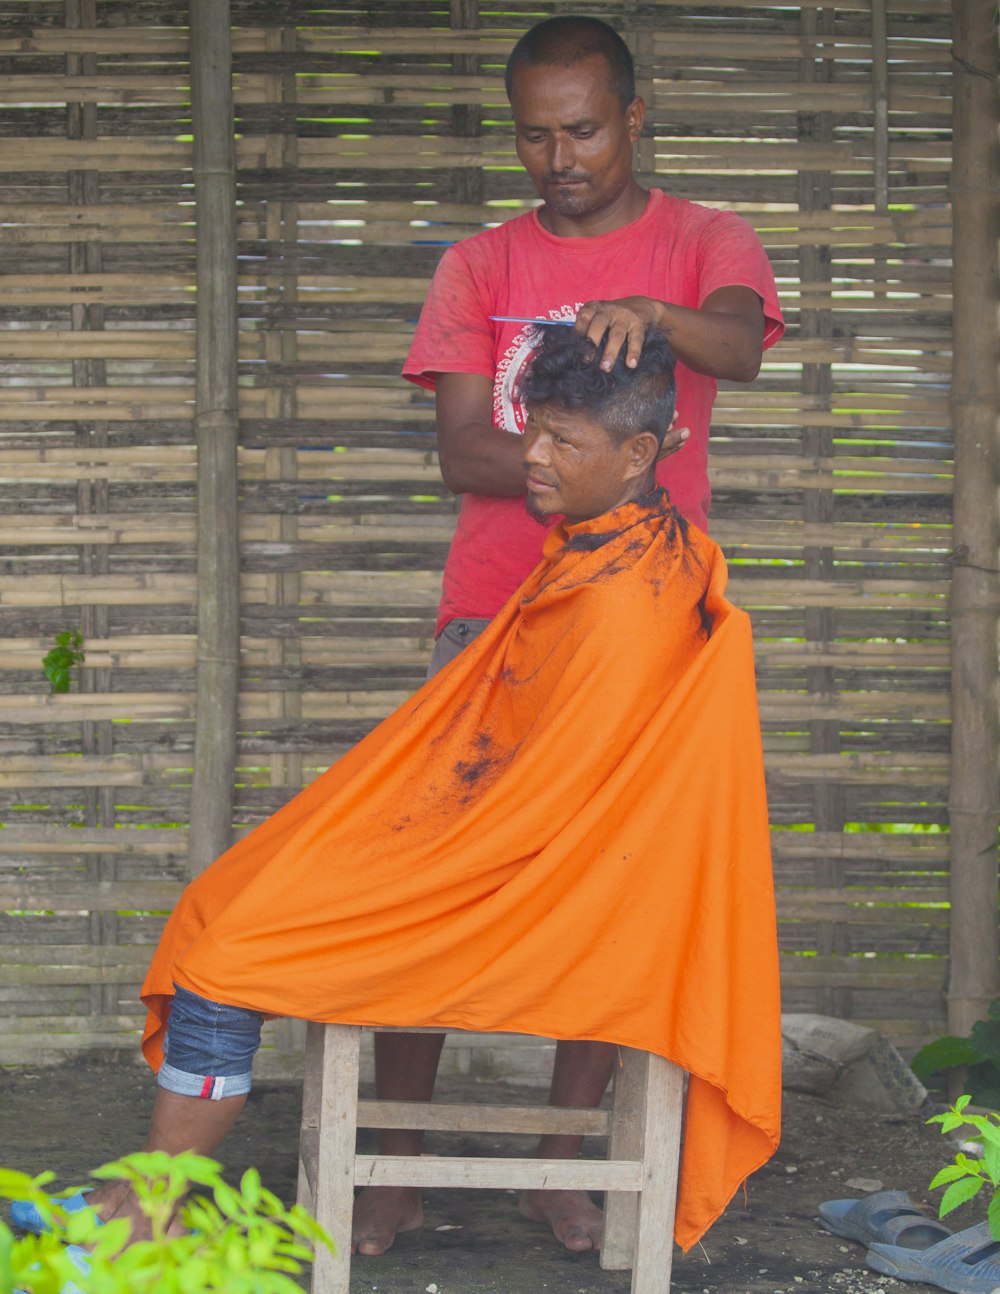 a man cutting another man's hair outside